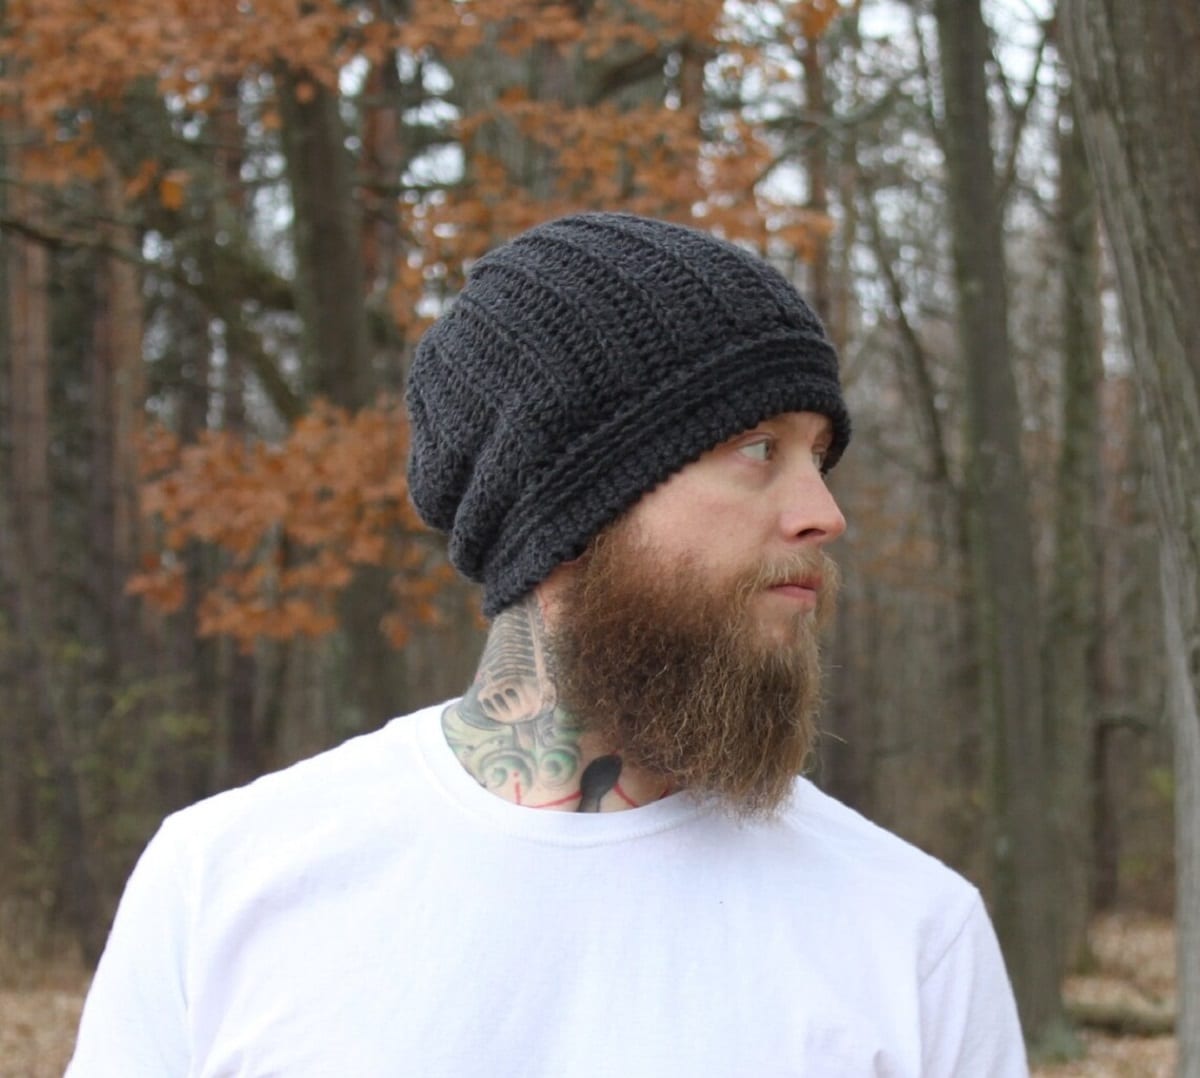 Bearded man in a forest wearing a black slouchy crochet beanie and a white top.